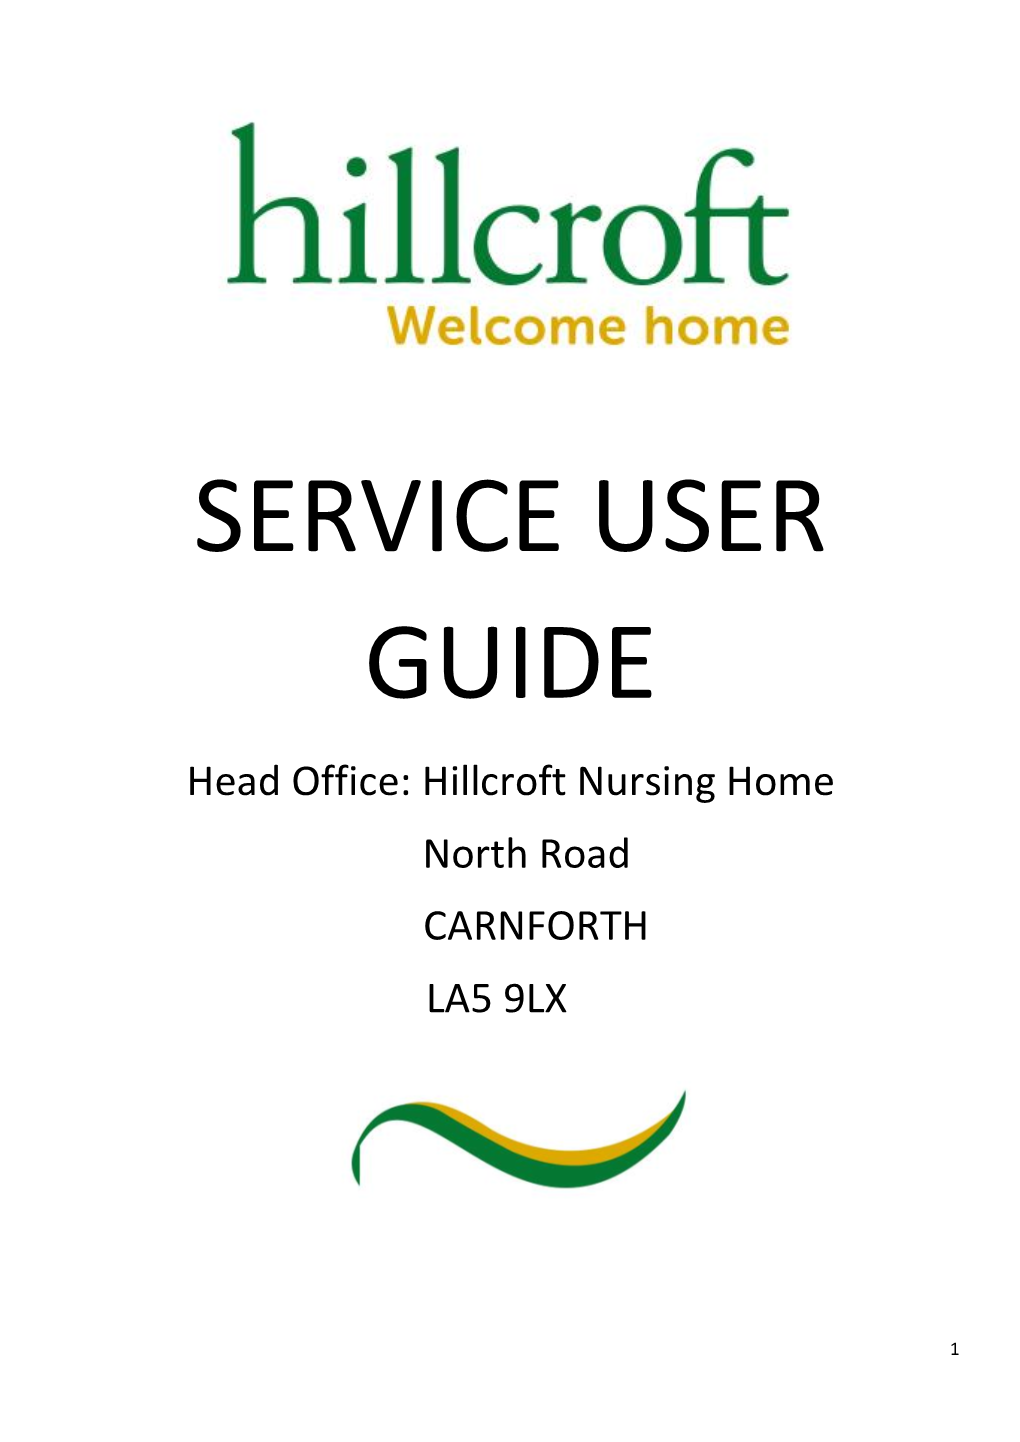 Service User Guide and Shown Here on Our Website